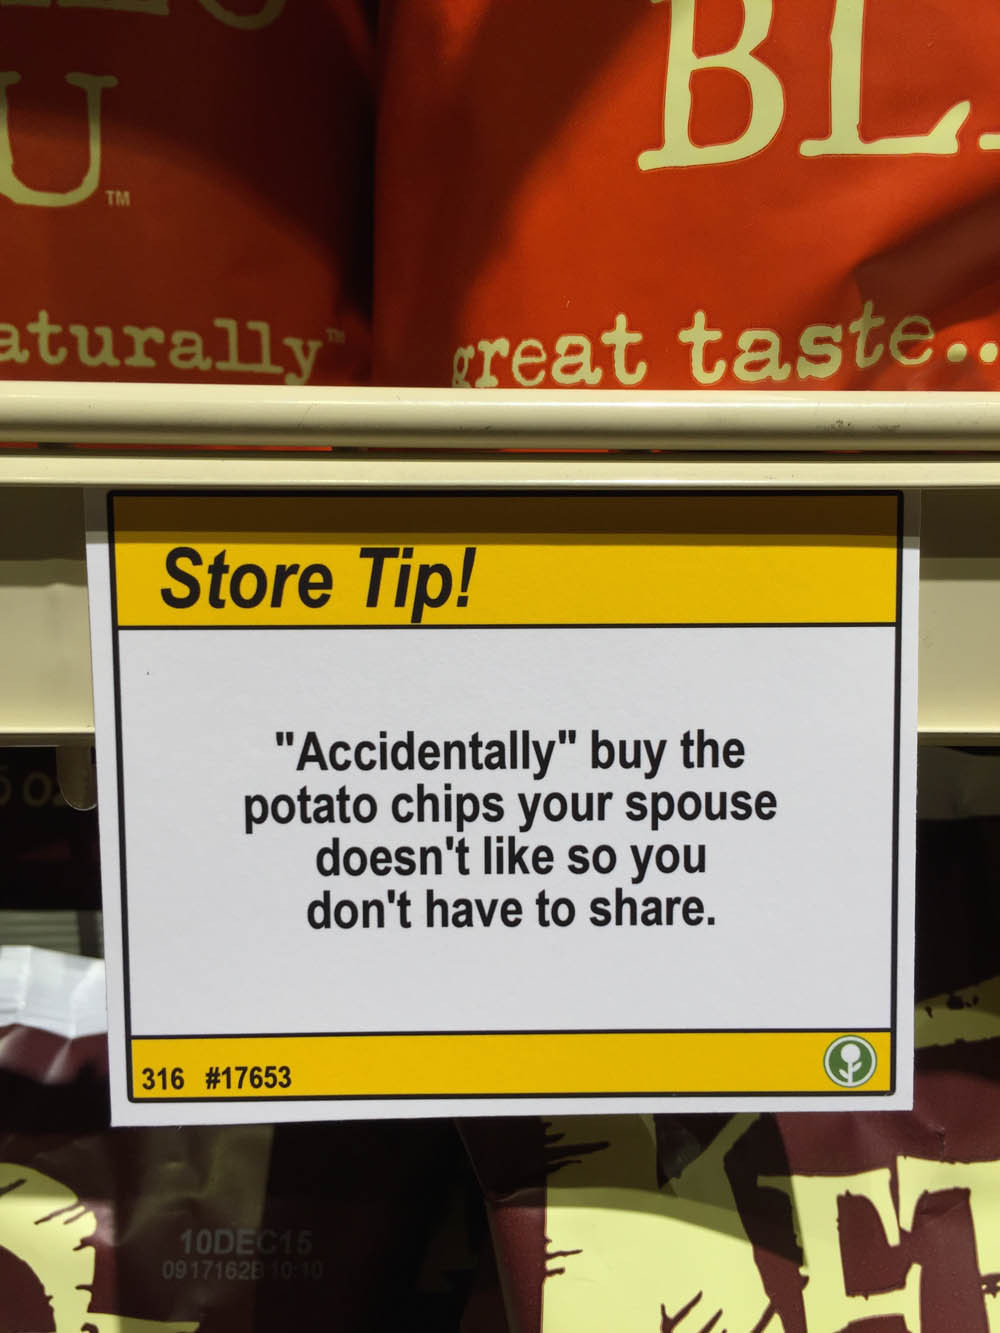 untexting:  obviousplant:  I added some store tips to a nearby grocery store   Come